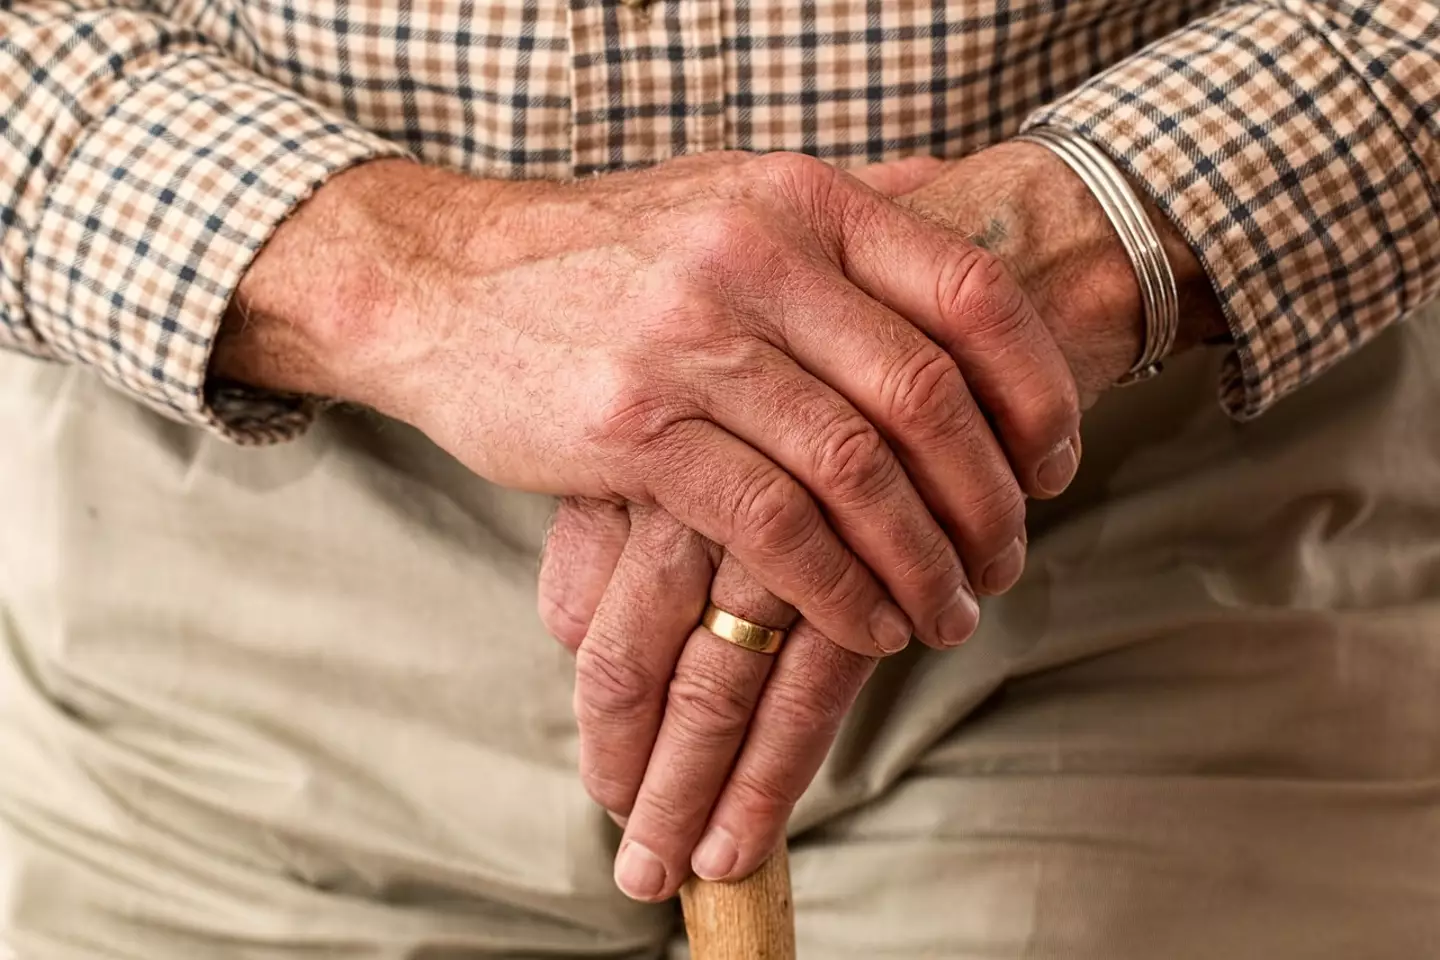 Scientists believe people can live for years beyond their 90s.